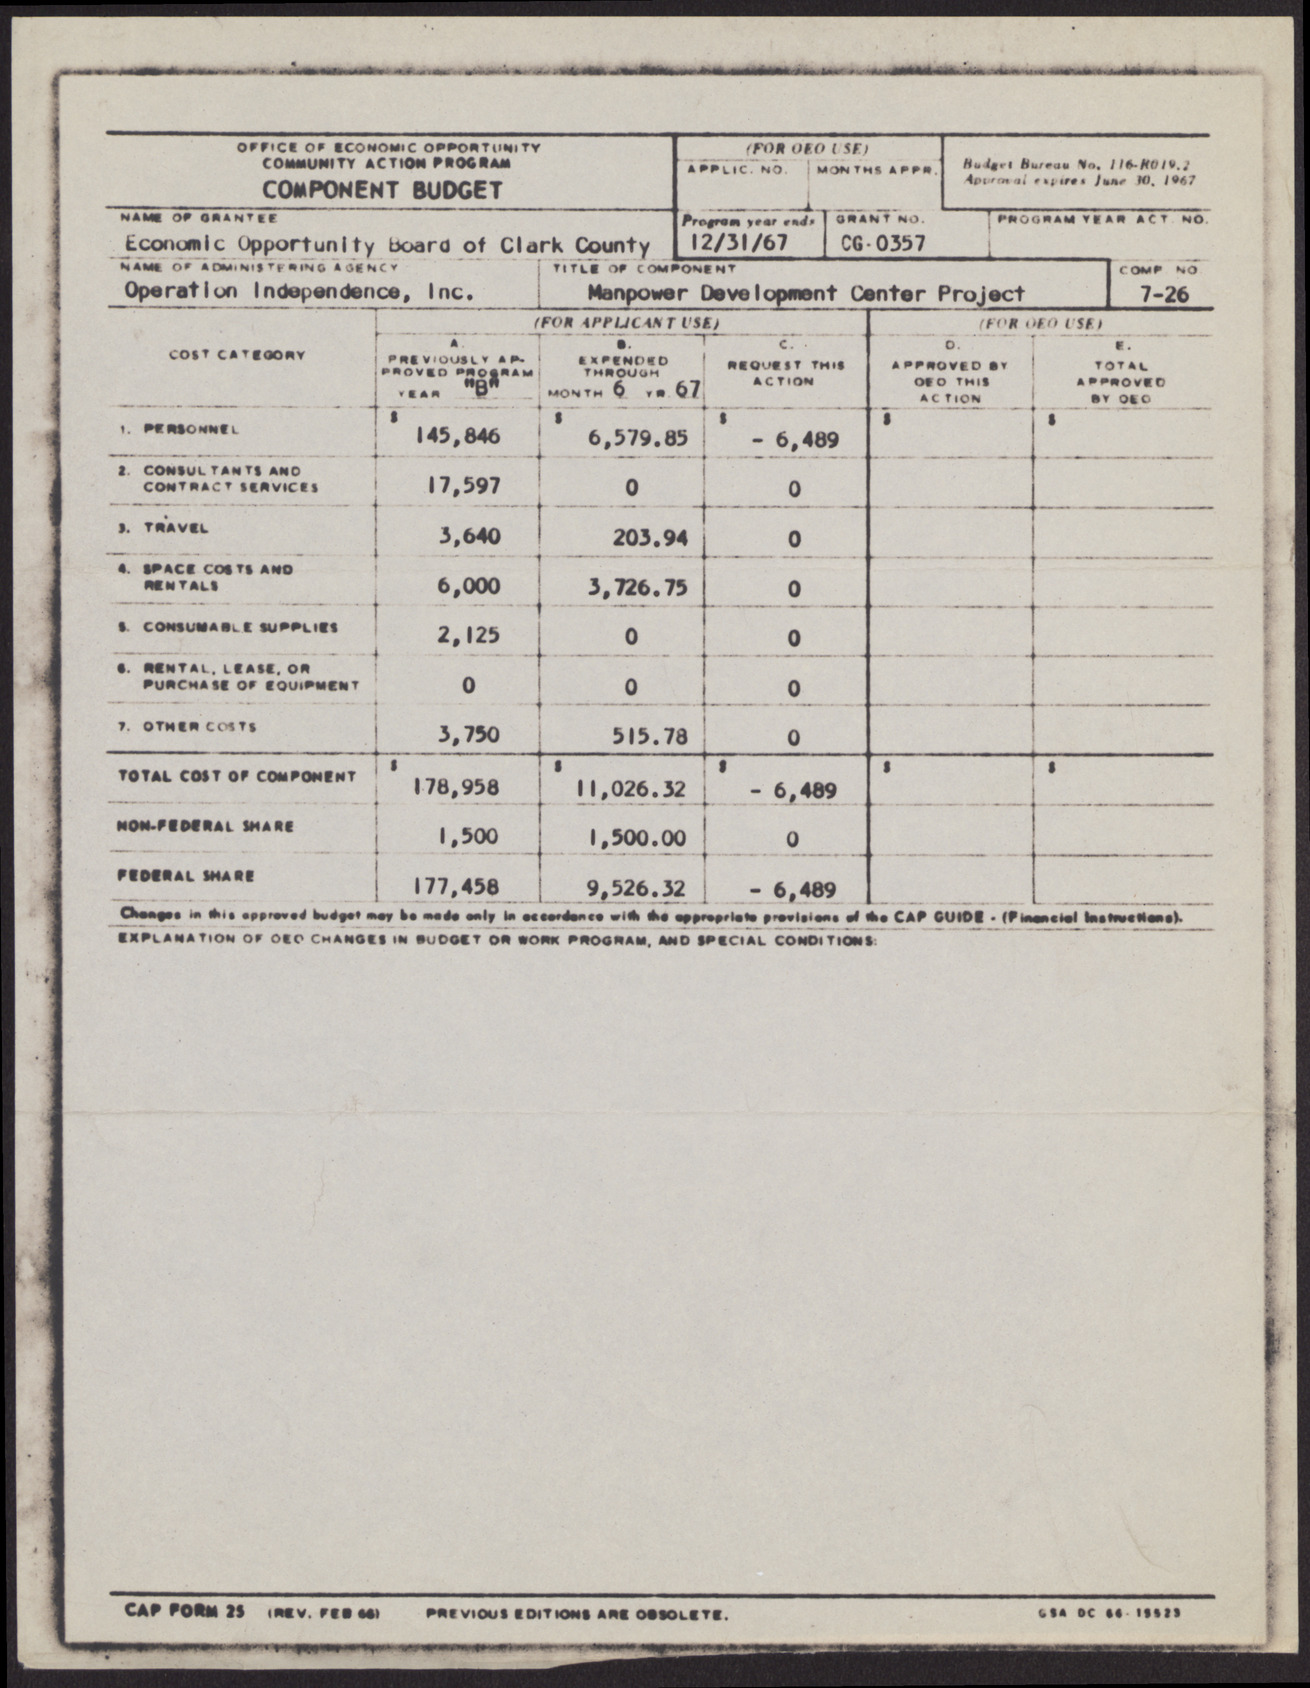 Office of Economic Opportunity Community Action Program Component Budget (2 pages), August 16, 1967